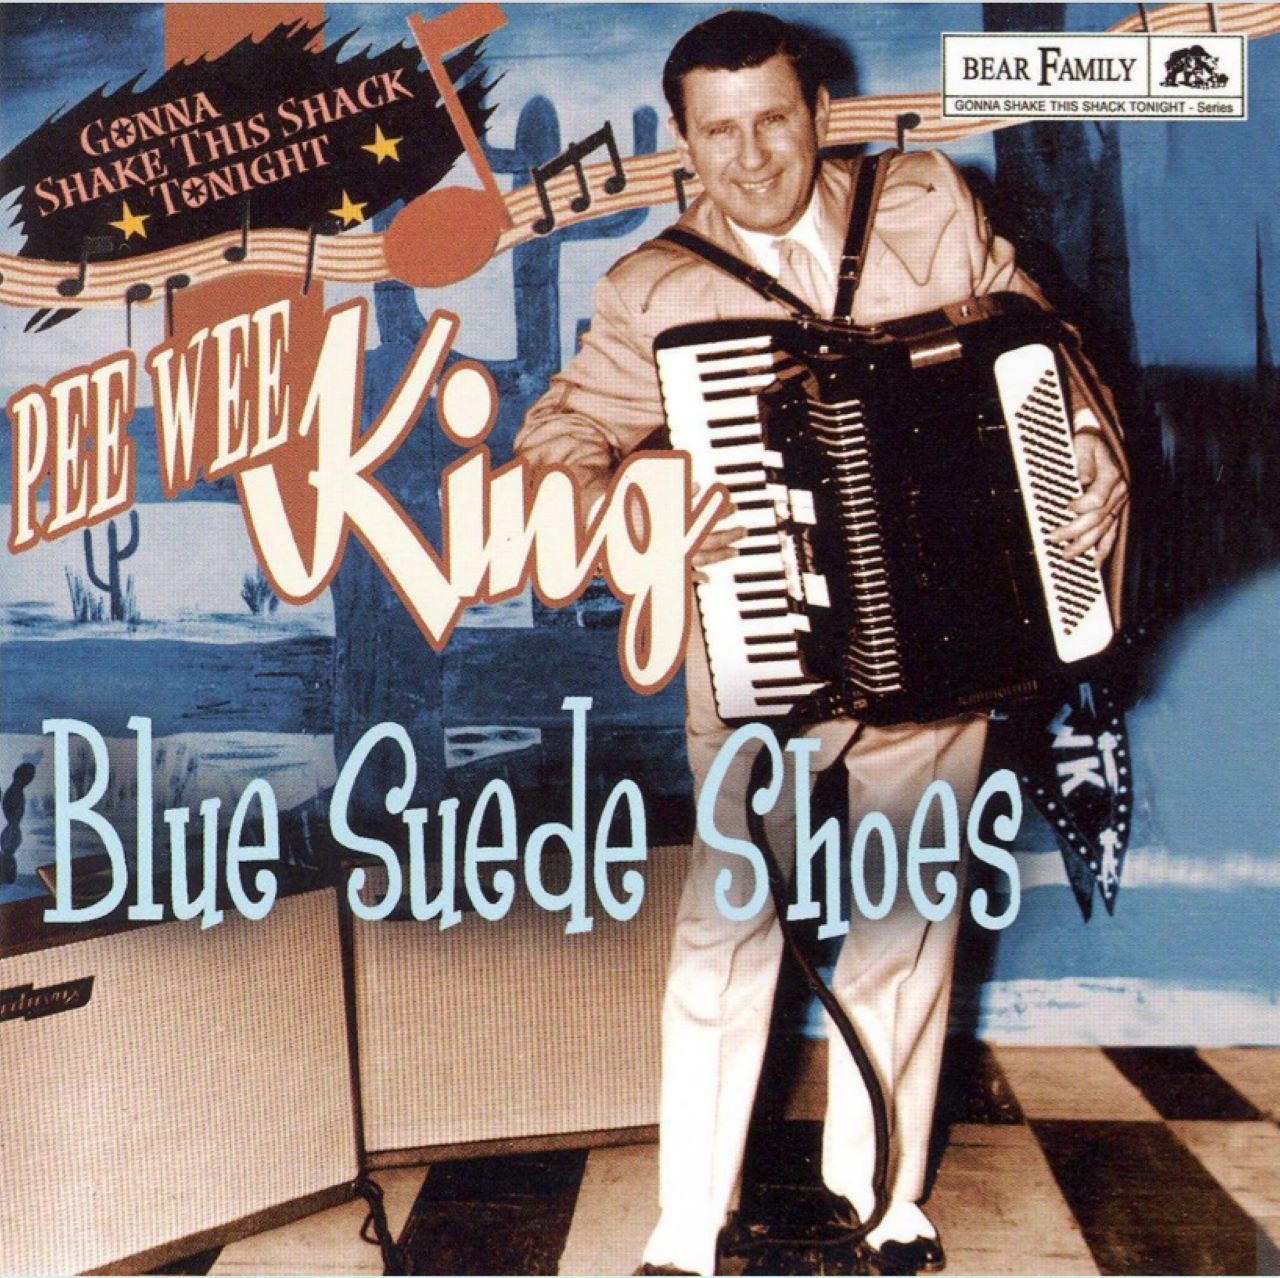 Pee Wee King - Blue Suede Shoes cover album